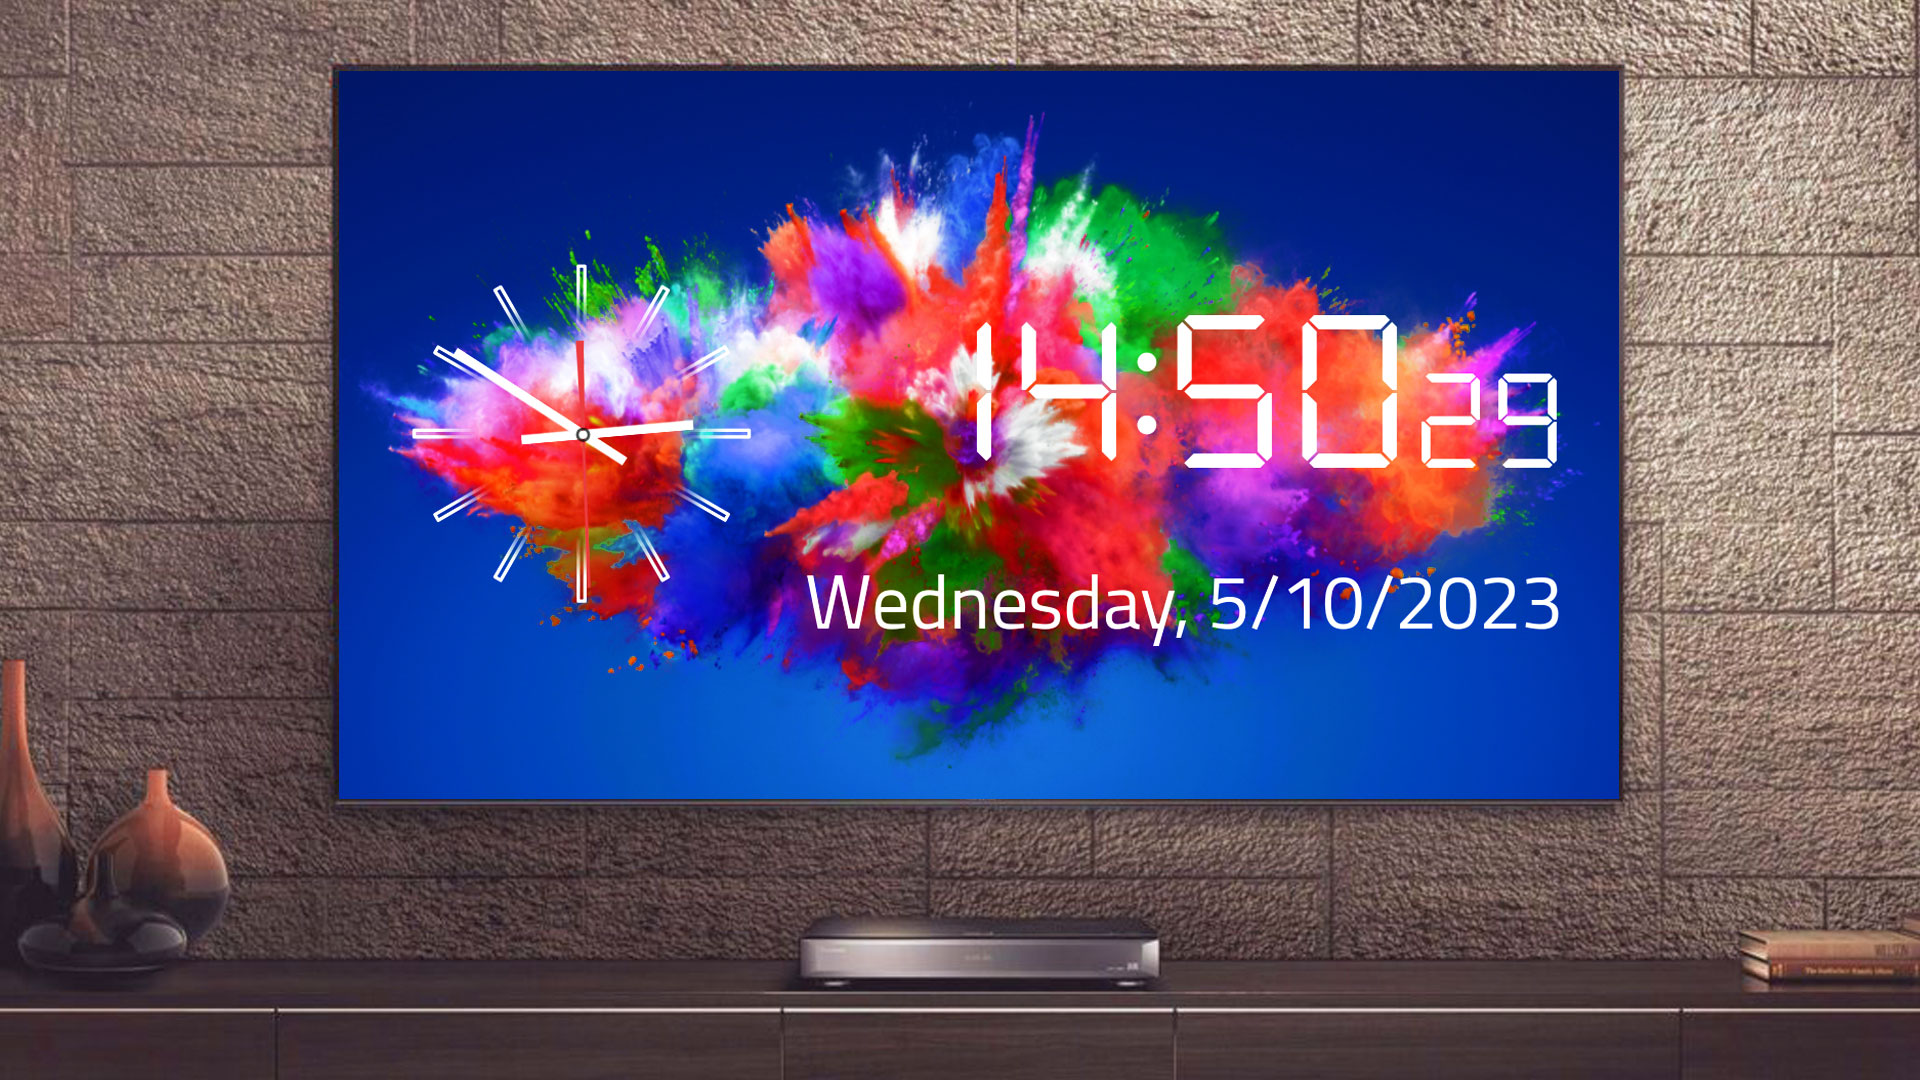 Abstract Smoke Colorful Ambience Clock HD - Analog And Digital Clock Screensaver For Tablets And Fire TV - NO ADS